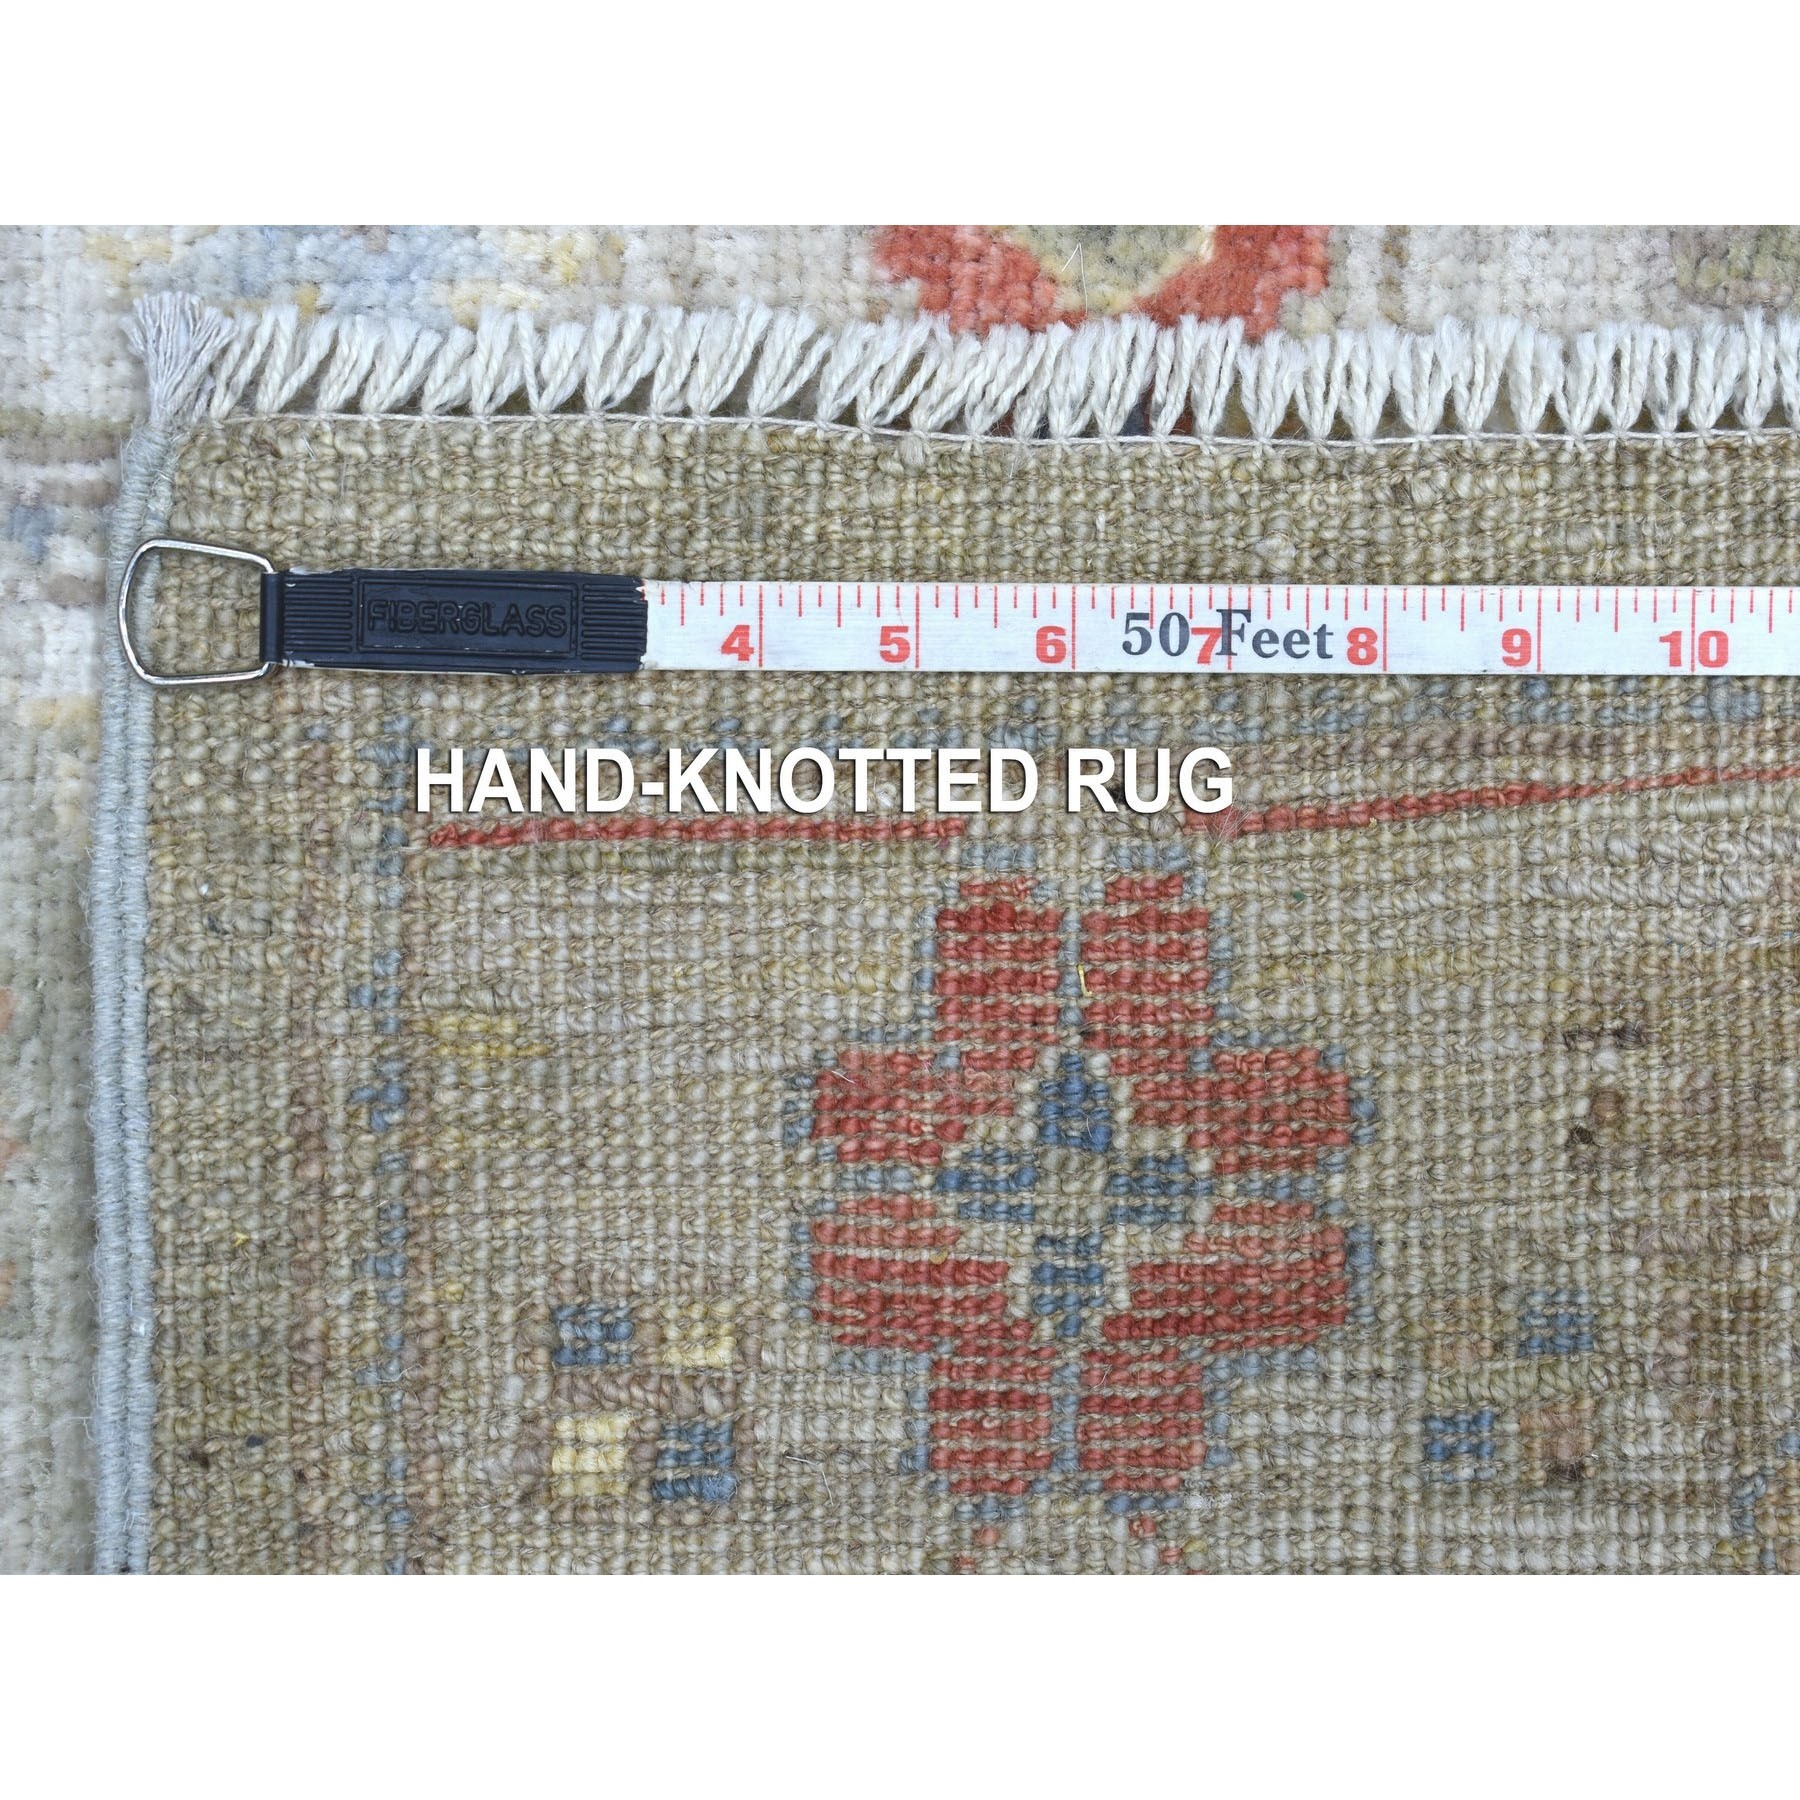 2'7"x17'5" Hand Woven Angora Oushak with Colorful Motifs Gray Extra Soft Wool Oriental XL Runner Rug 